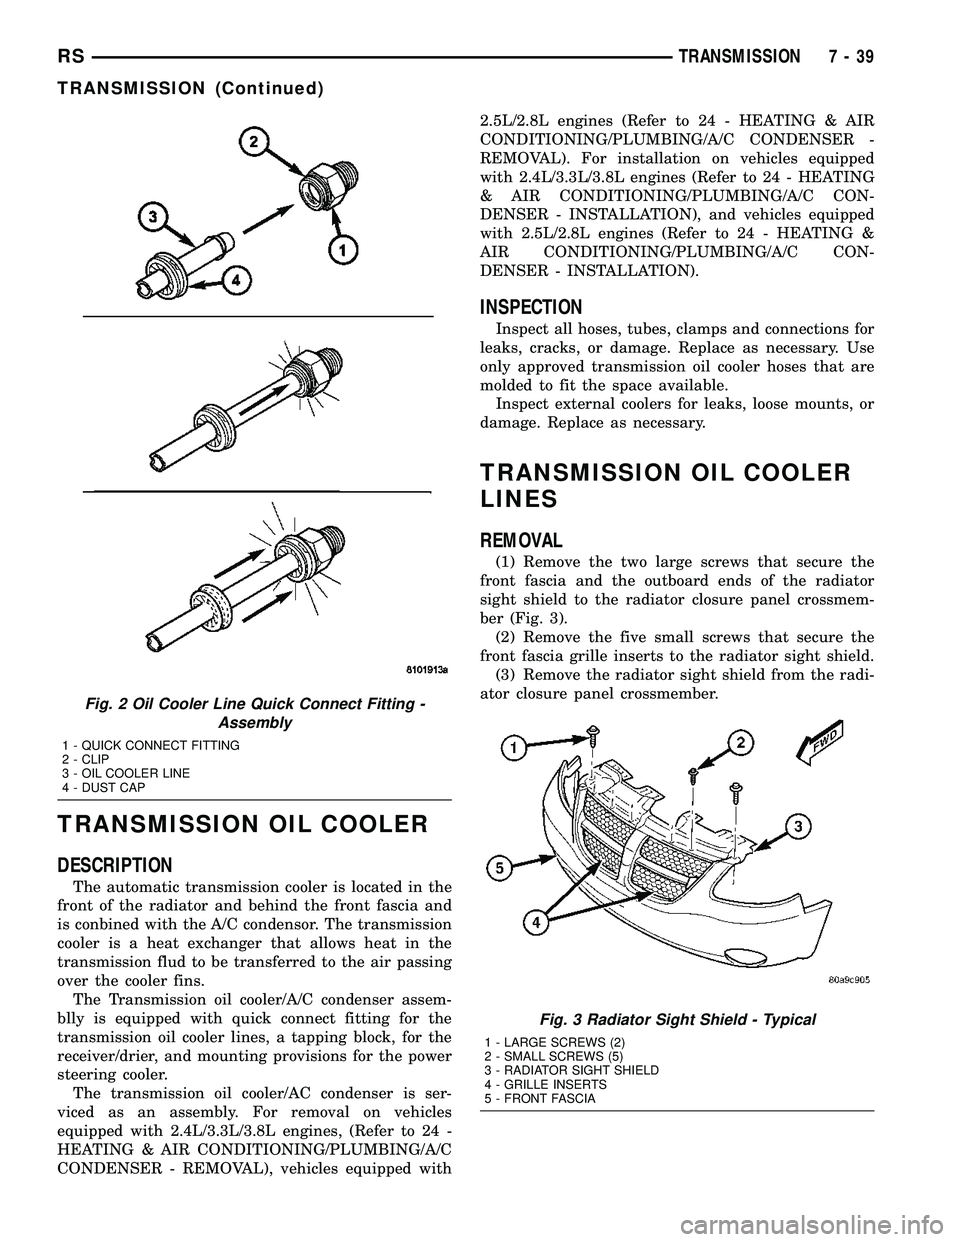 CHRYSLER VOYAGER 2005 Owners Manual TRANSMISSION OIL COOLER
DESCRIPTION
The automatic transmission cooler is located in the
front of the radiator and behind the front fascia and
is conbined with the A/C condensor. The transmission
coole